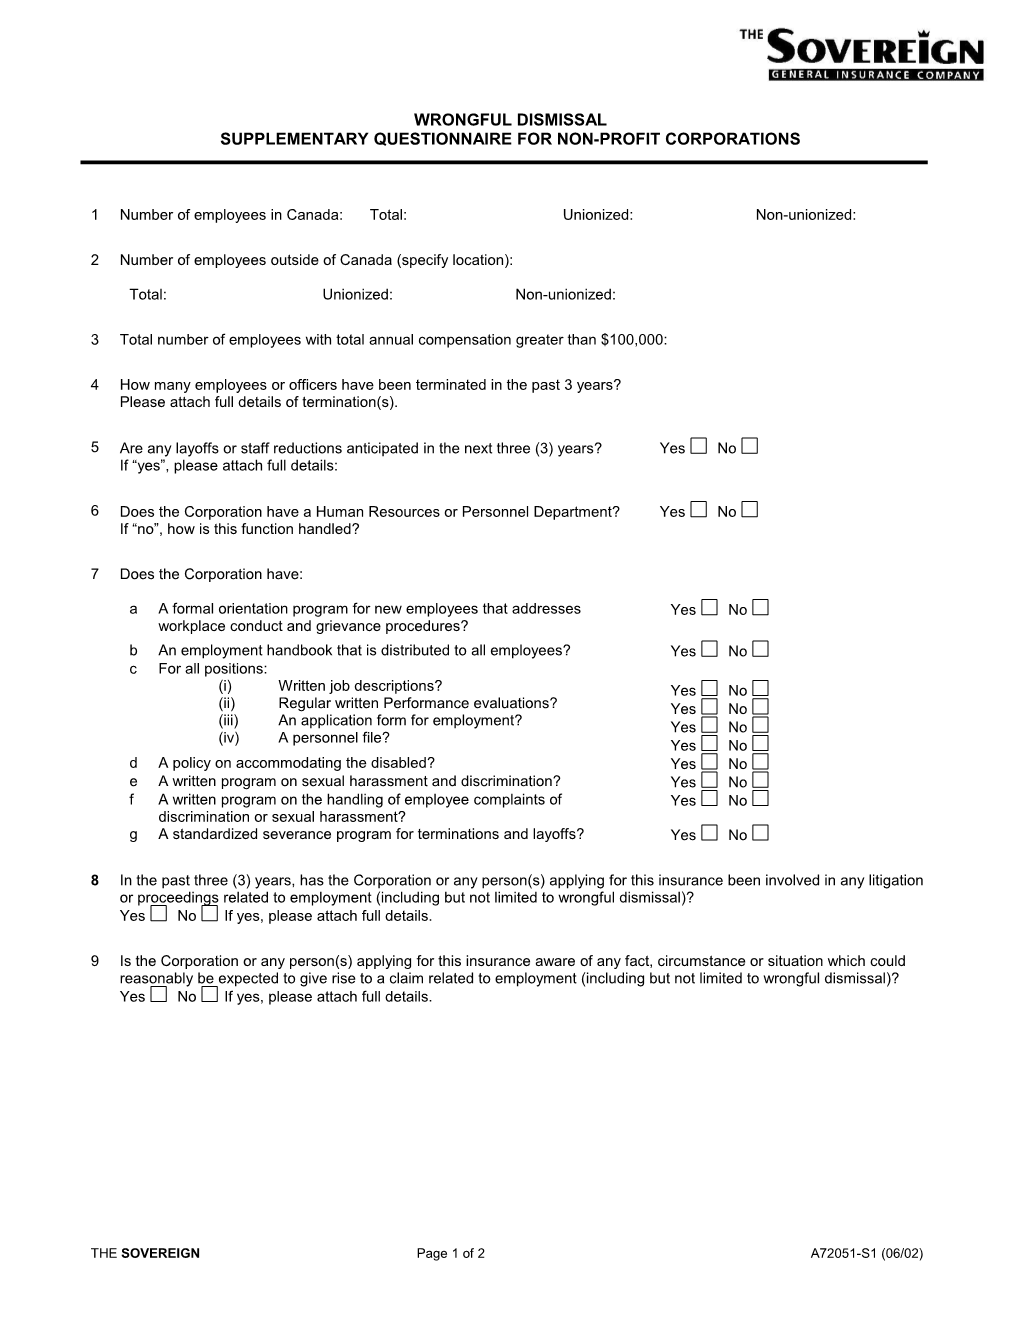 Supplementary Questionnaire for Non-Profit Corporations